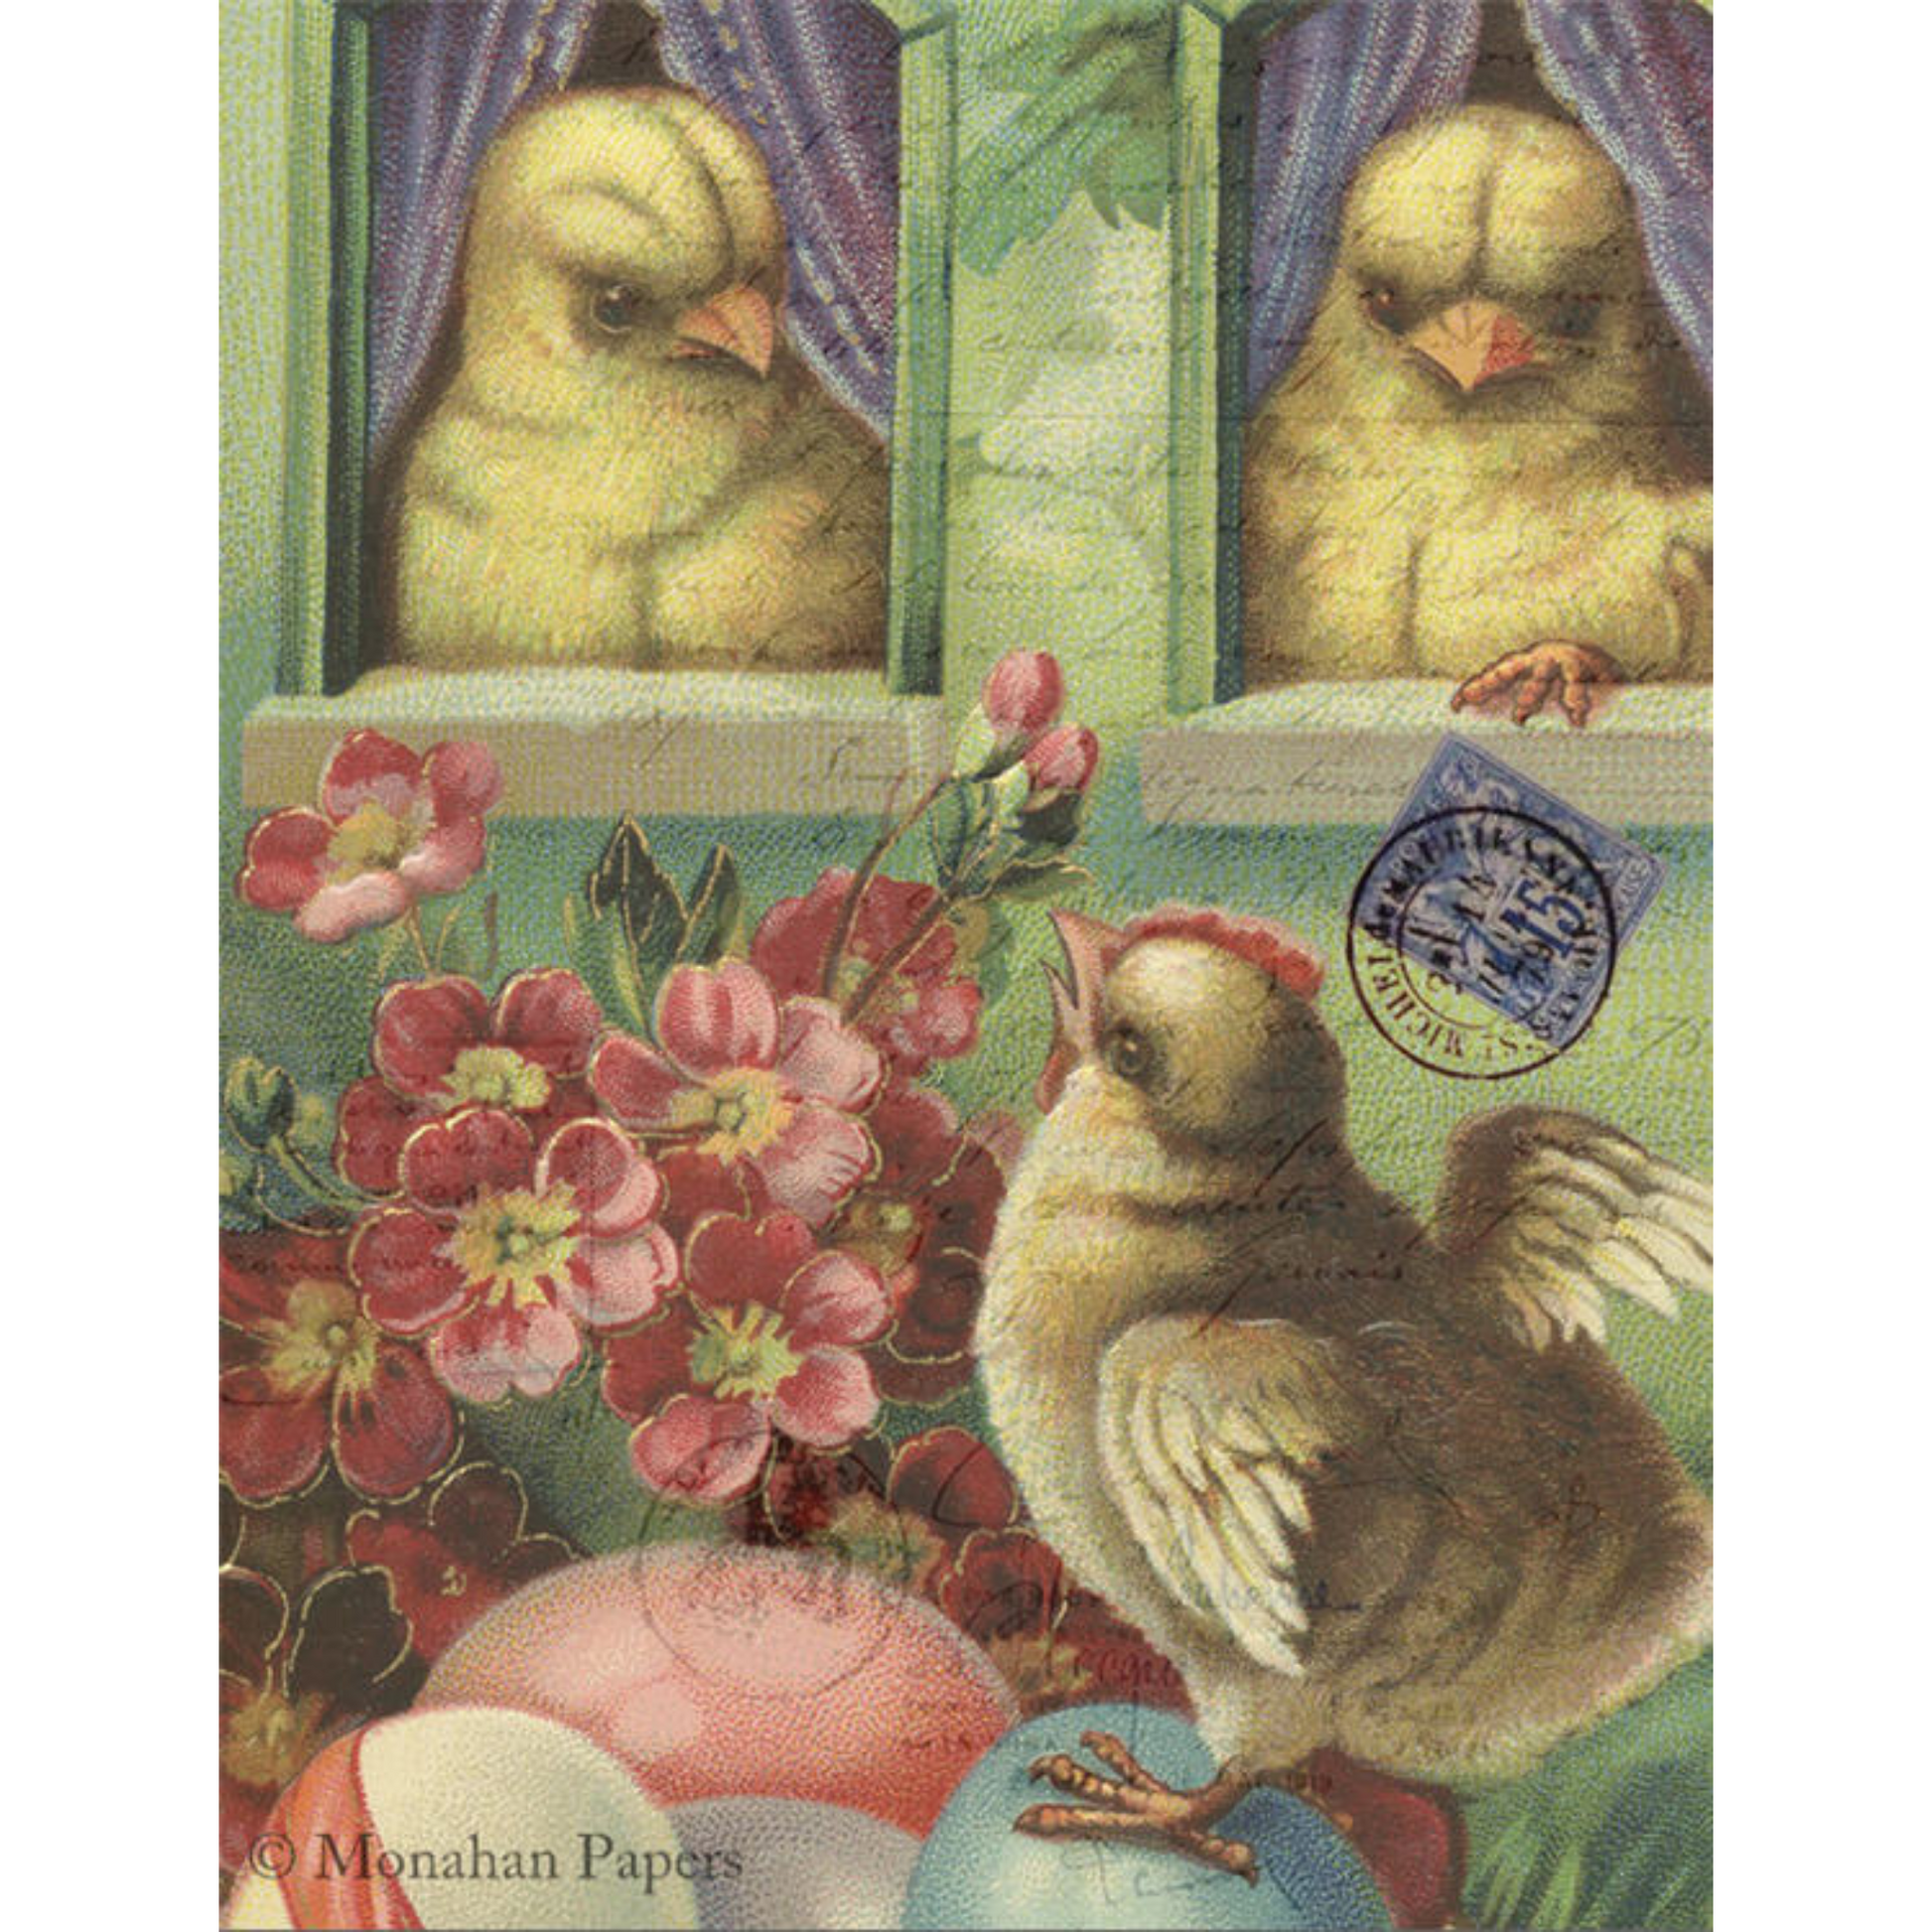 "Window Chicks" Decoupage Paper by Monahan Papers. Size 11" x 17" available at Milton's Daughter.